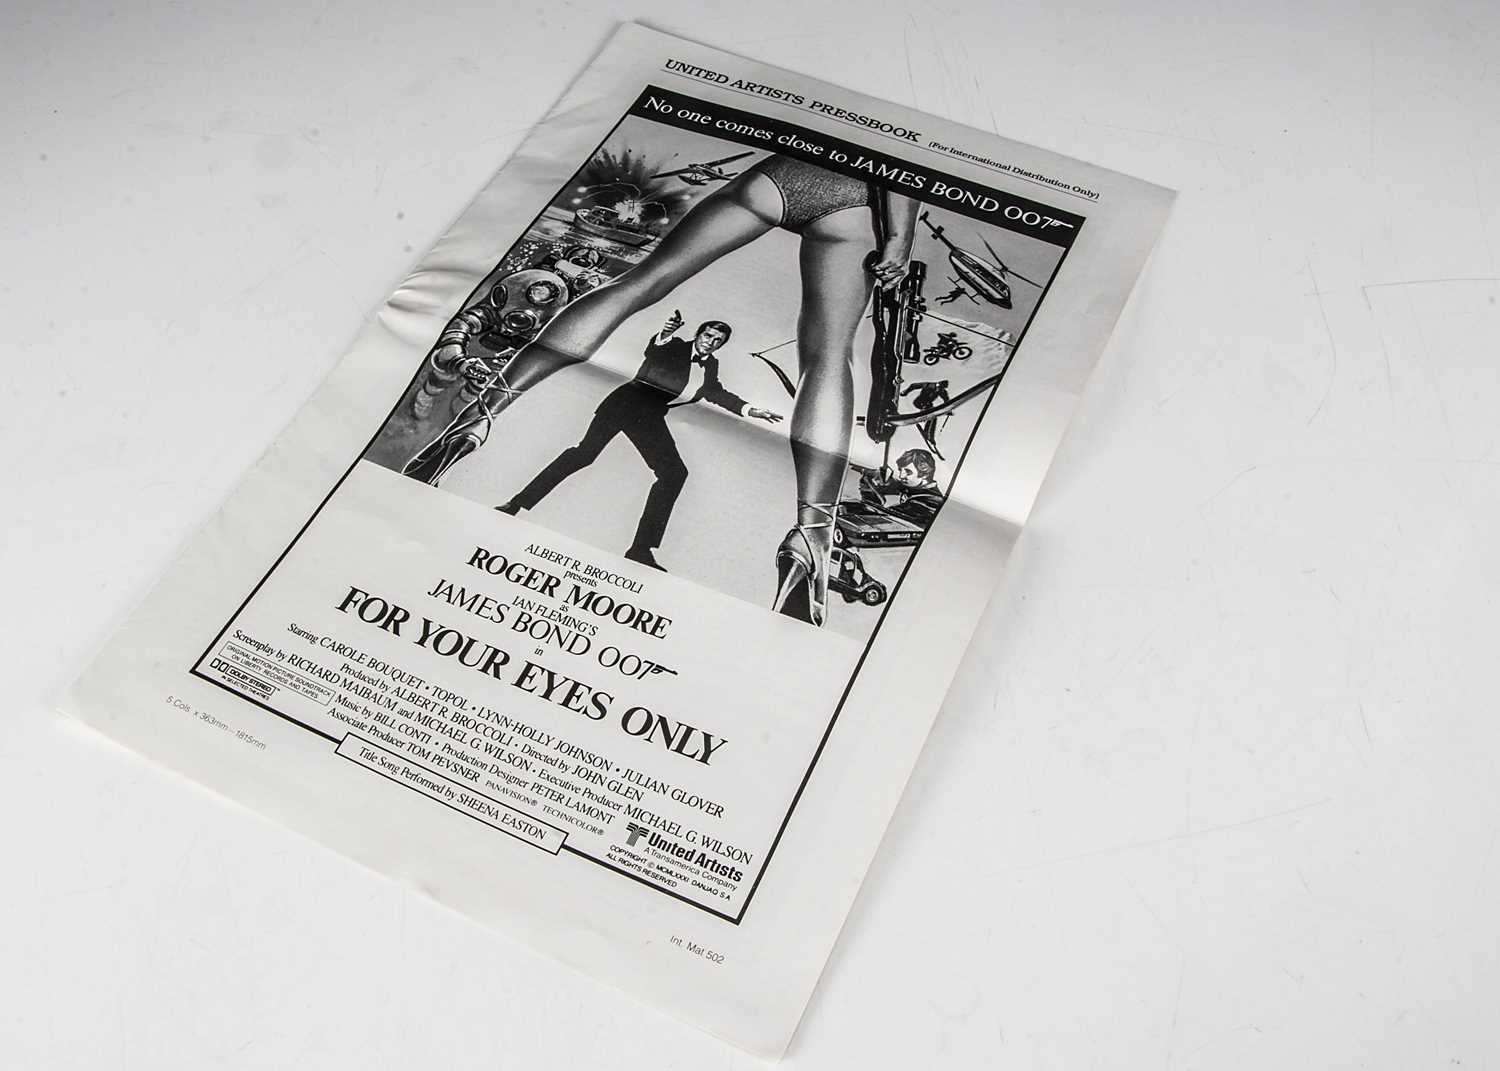 Lot 538 - James Bond / For Your Eyes Only Campaign Book / Pressbook